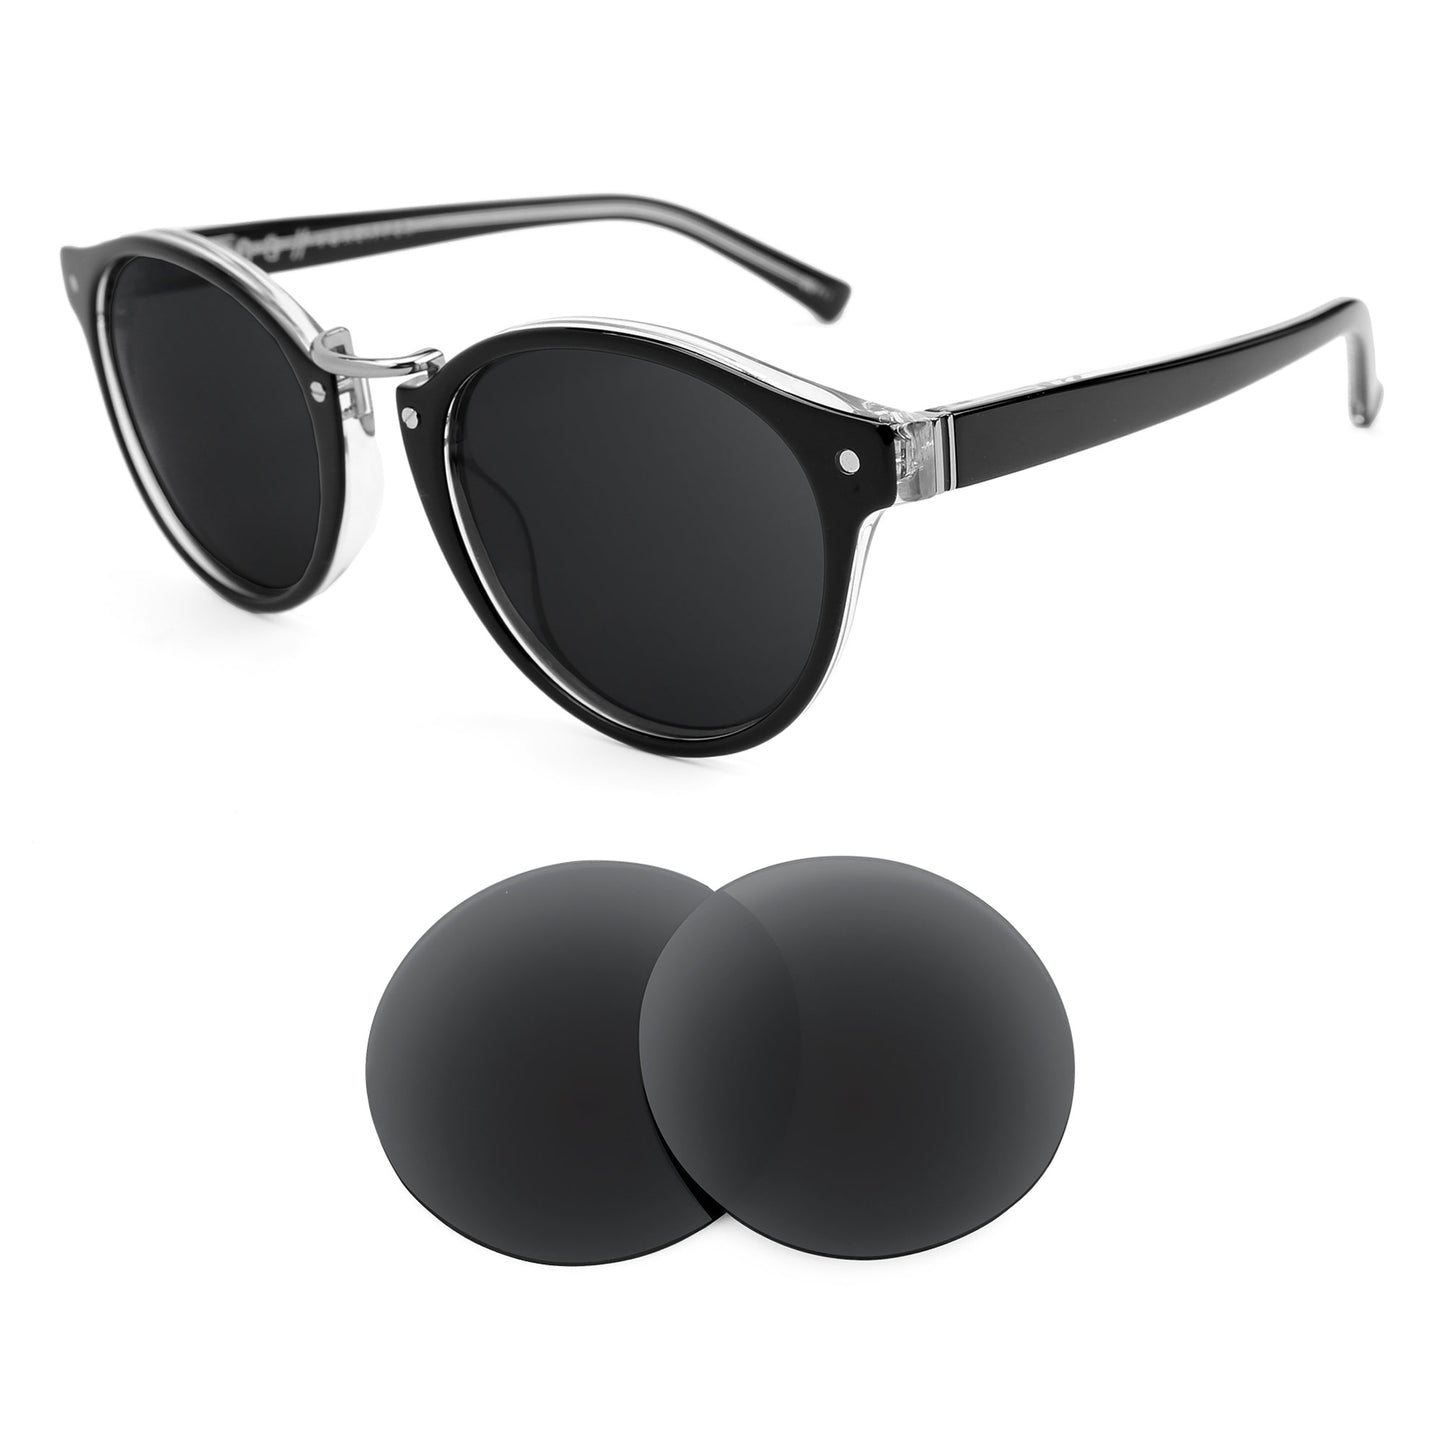 VonZipper Stax sunglasses with replacement lenses